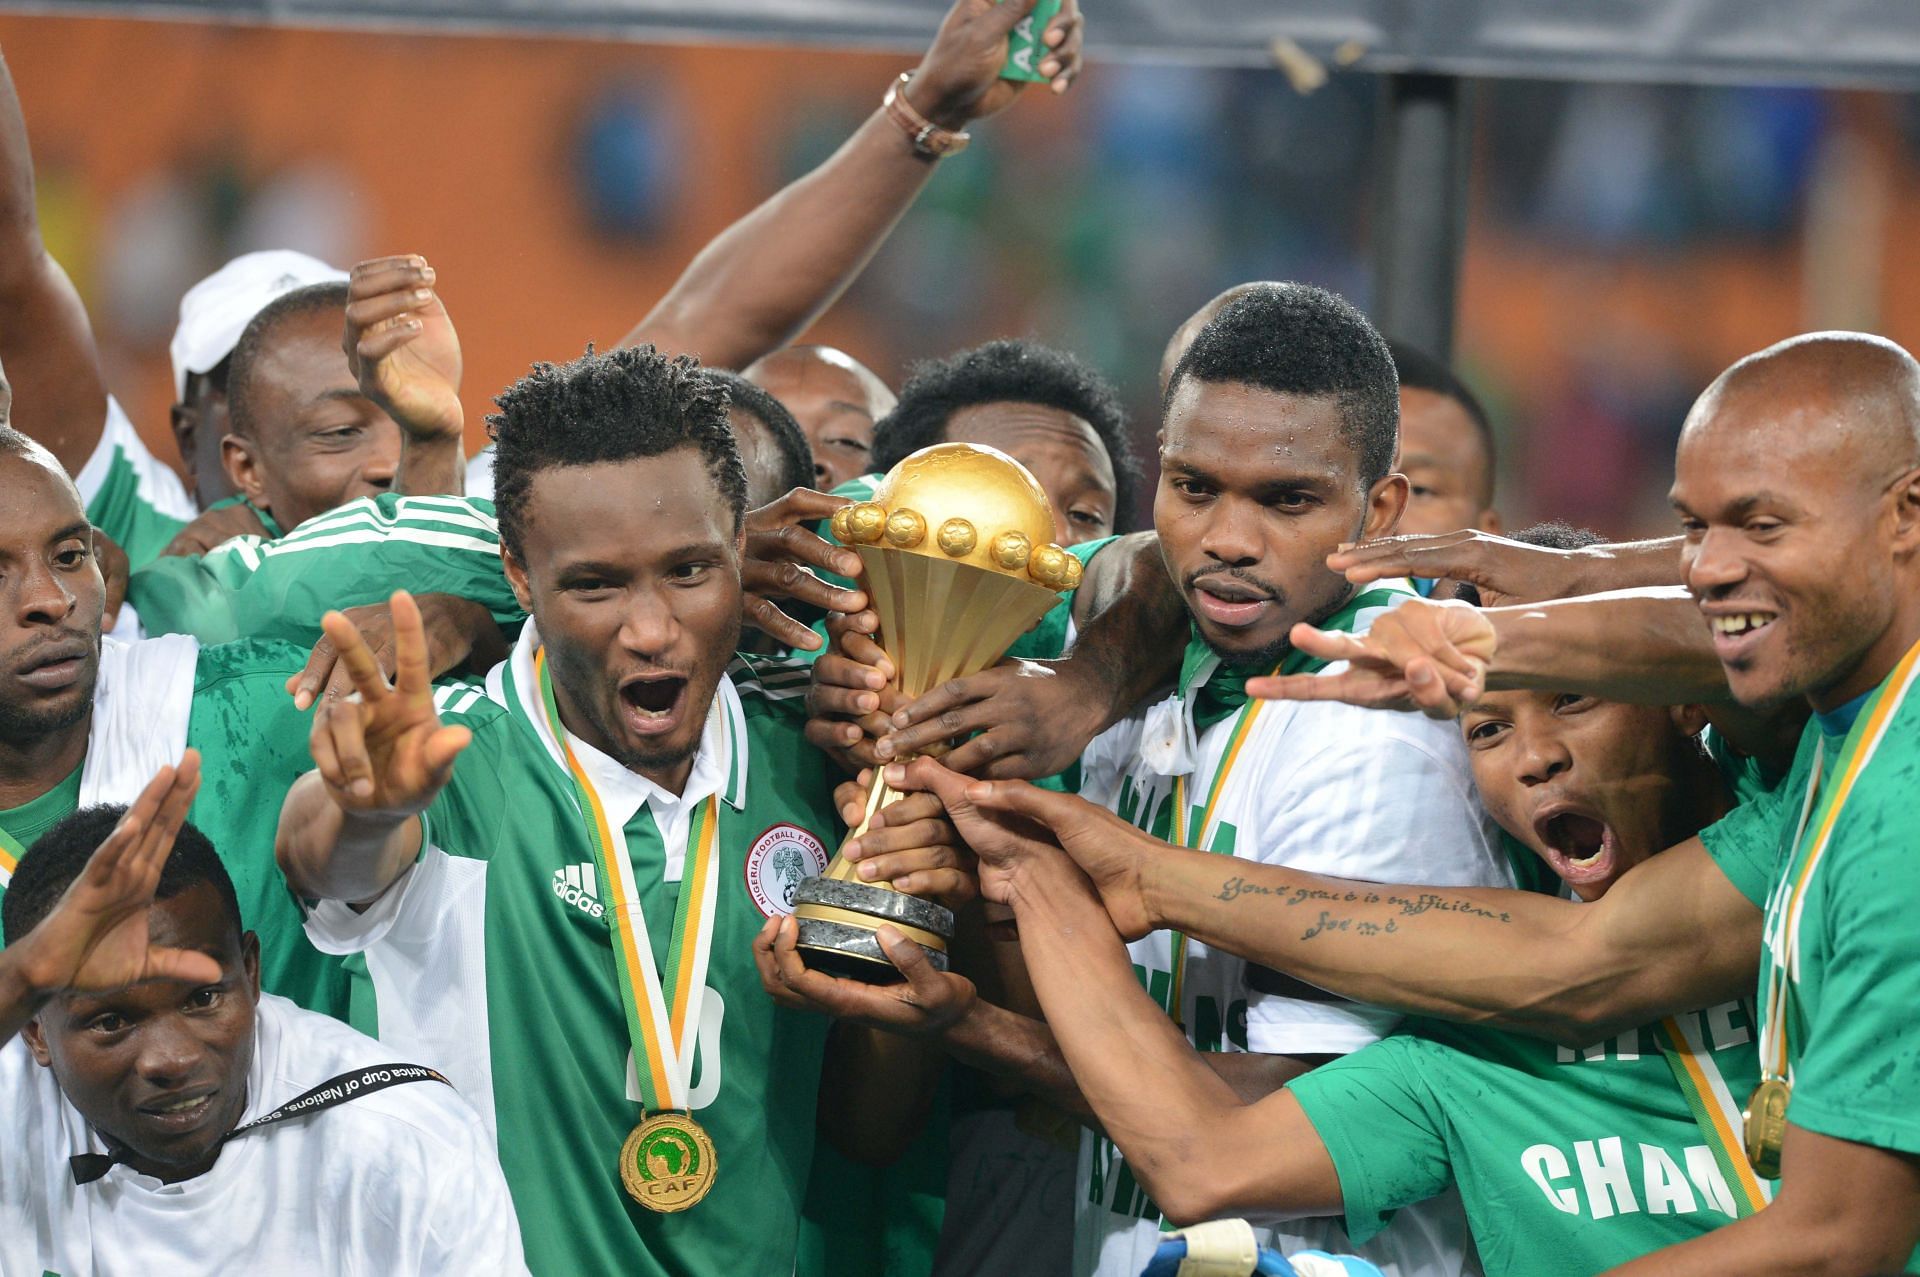 Nigeria lifting their trophy at the 2013 Africa Cup of Nations Final